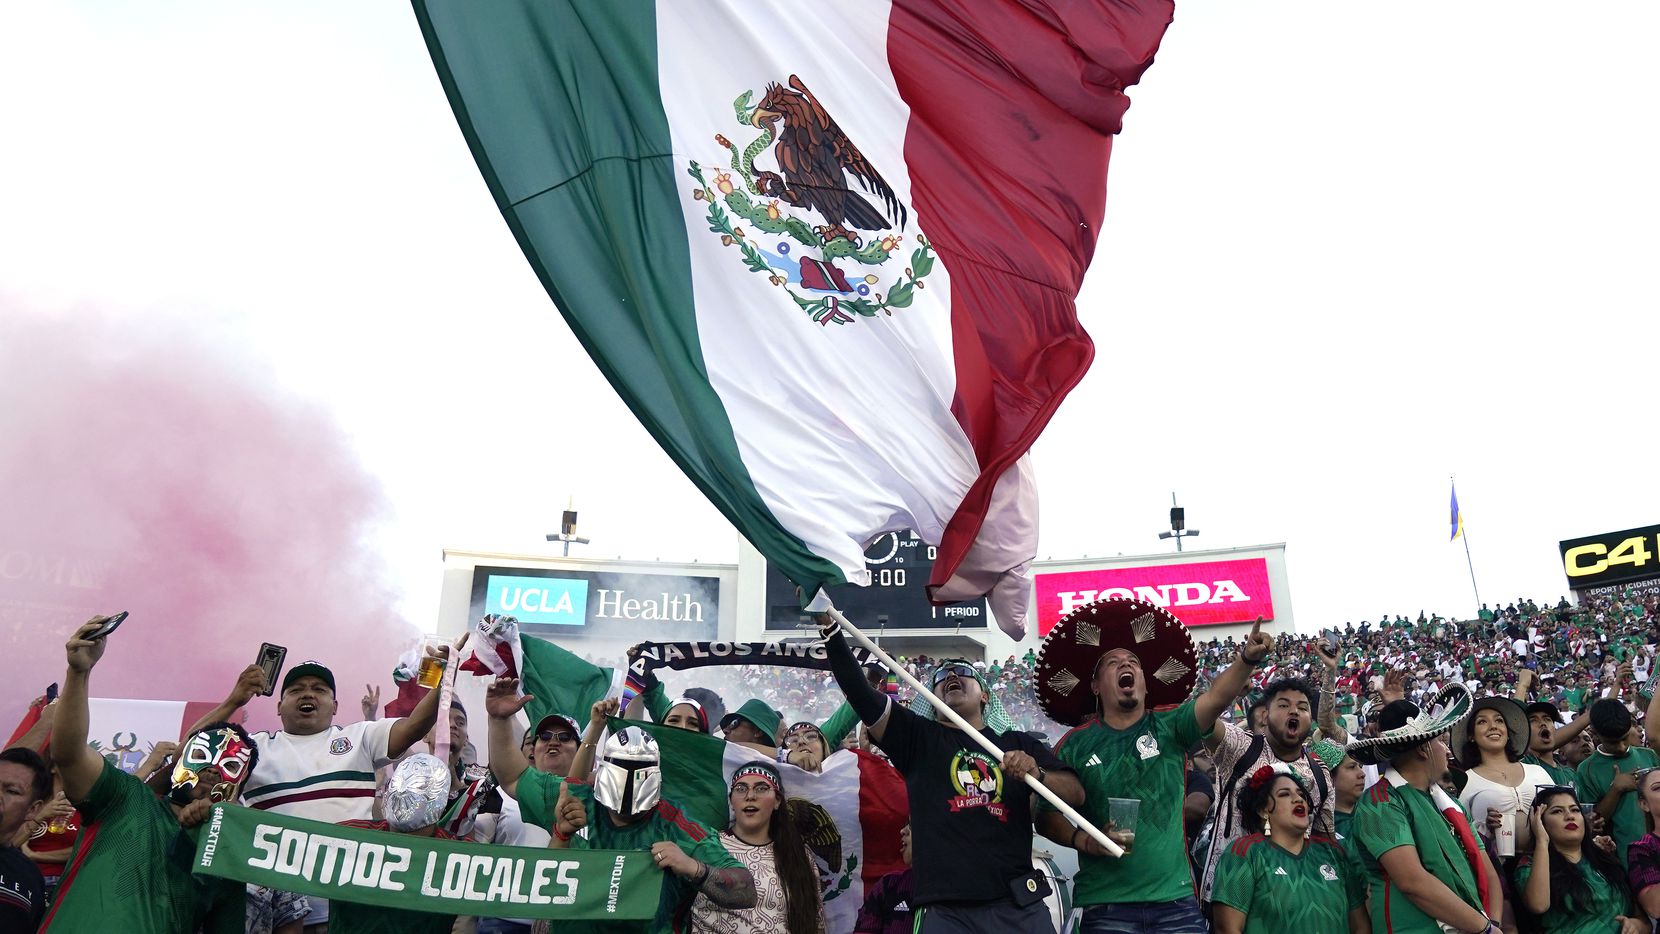 Traffic Advisory for Today in Santa Clara Due to Mexico-Colombia Game at Levi’s Stadium